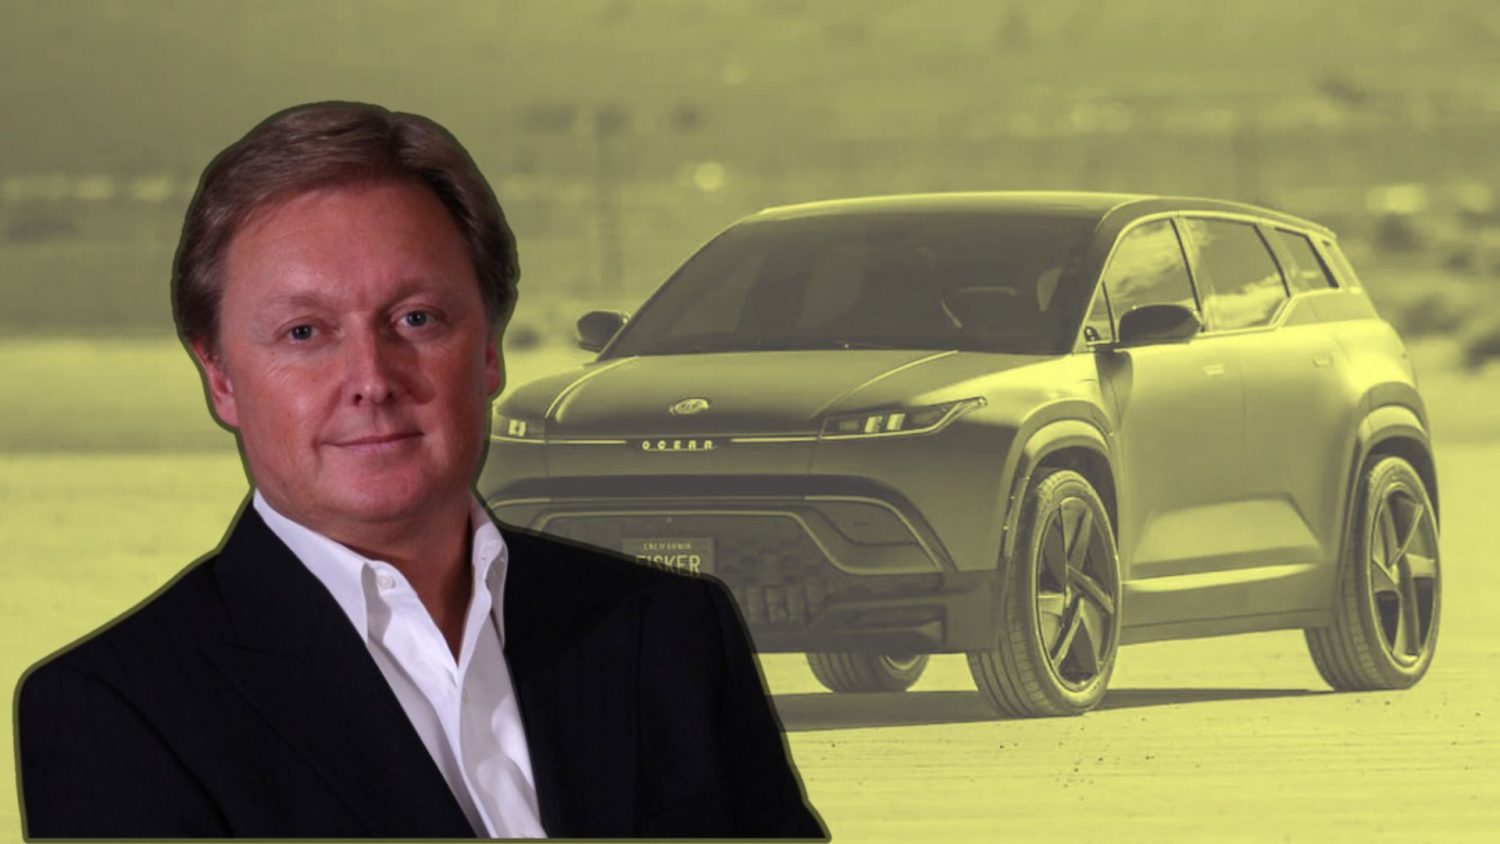 The ODI of the NHTSA has released a notice stating that it's investigating Fisker's Ocean SUV for a lack of braking performance.